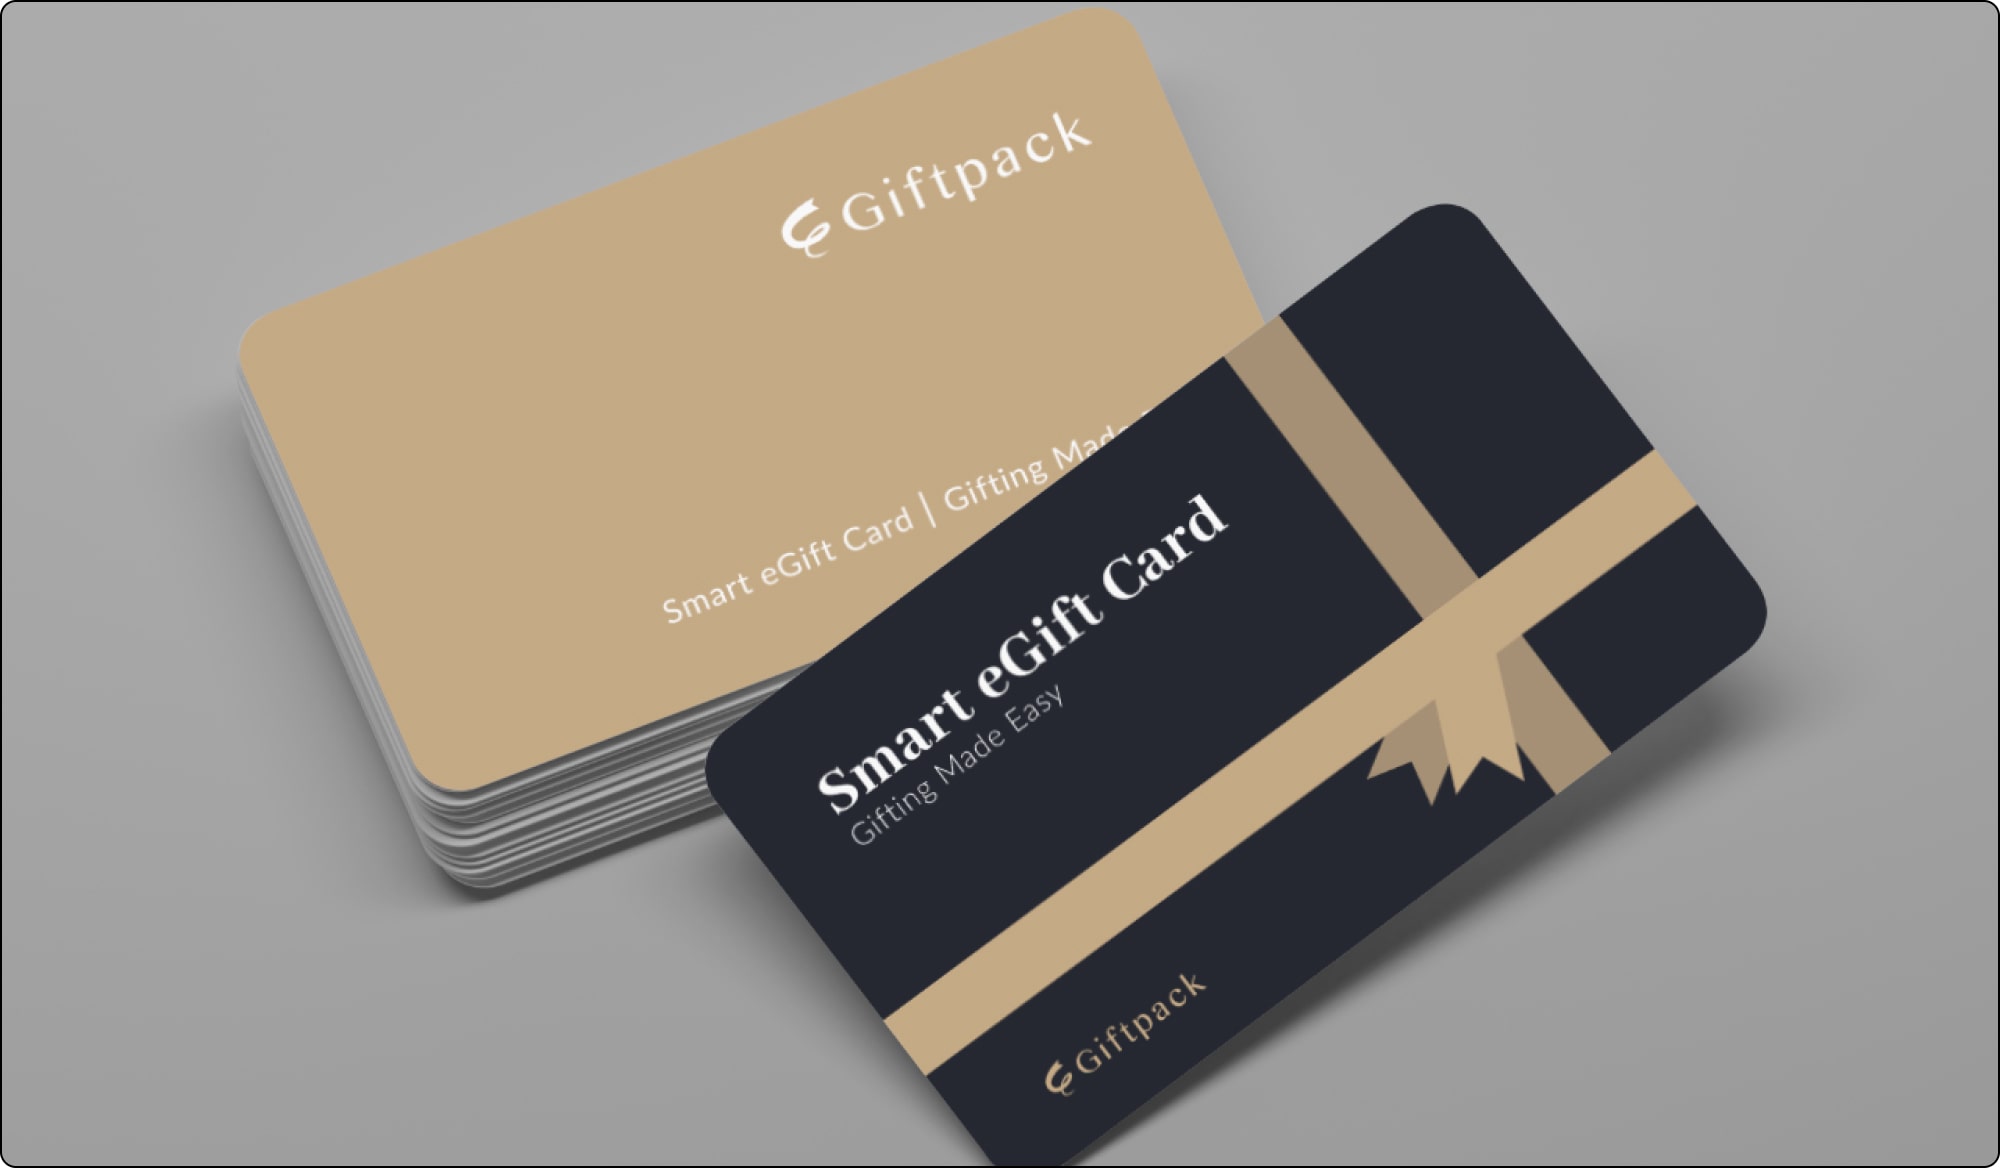 giftpack smart egift card for 350 brands for employee appreciation box